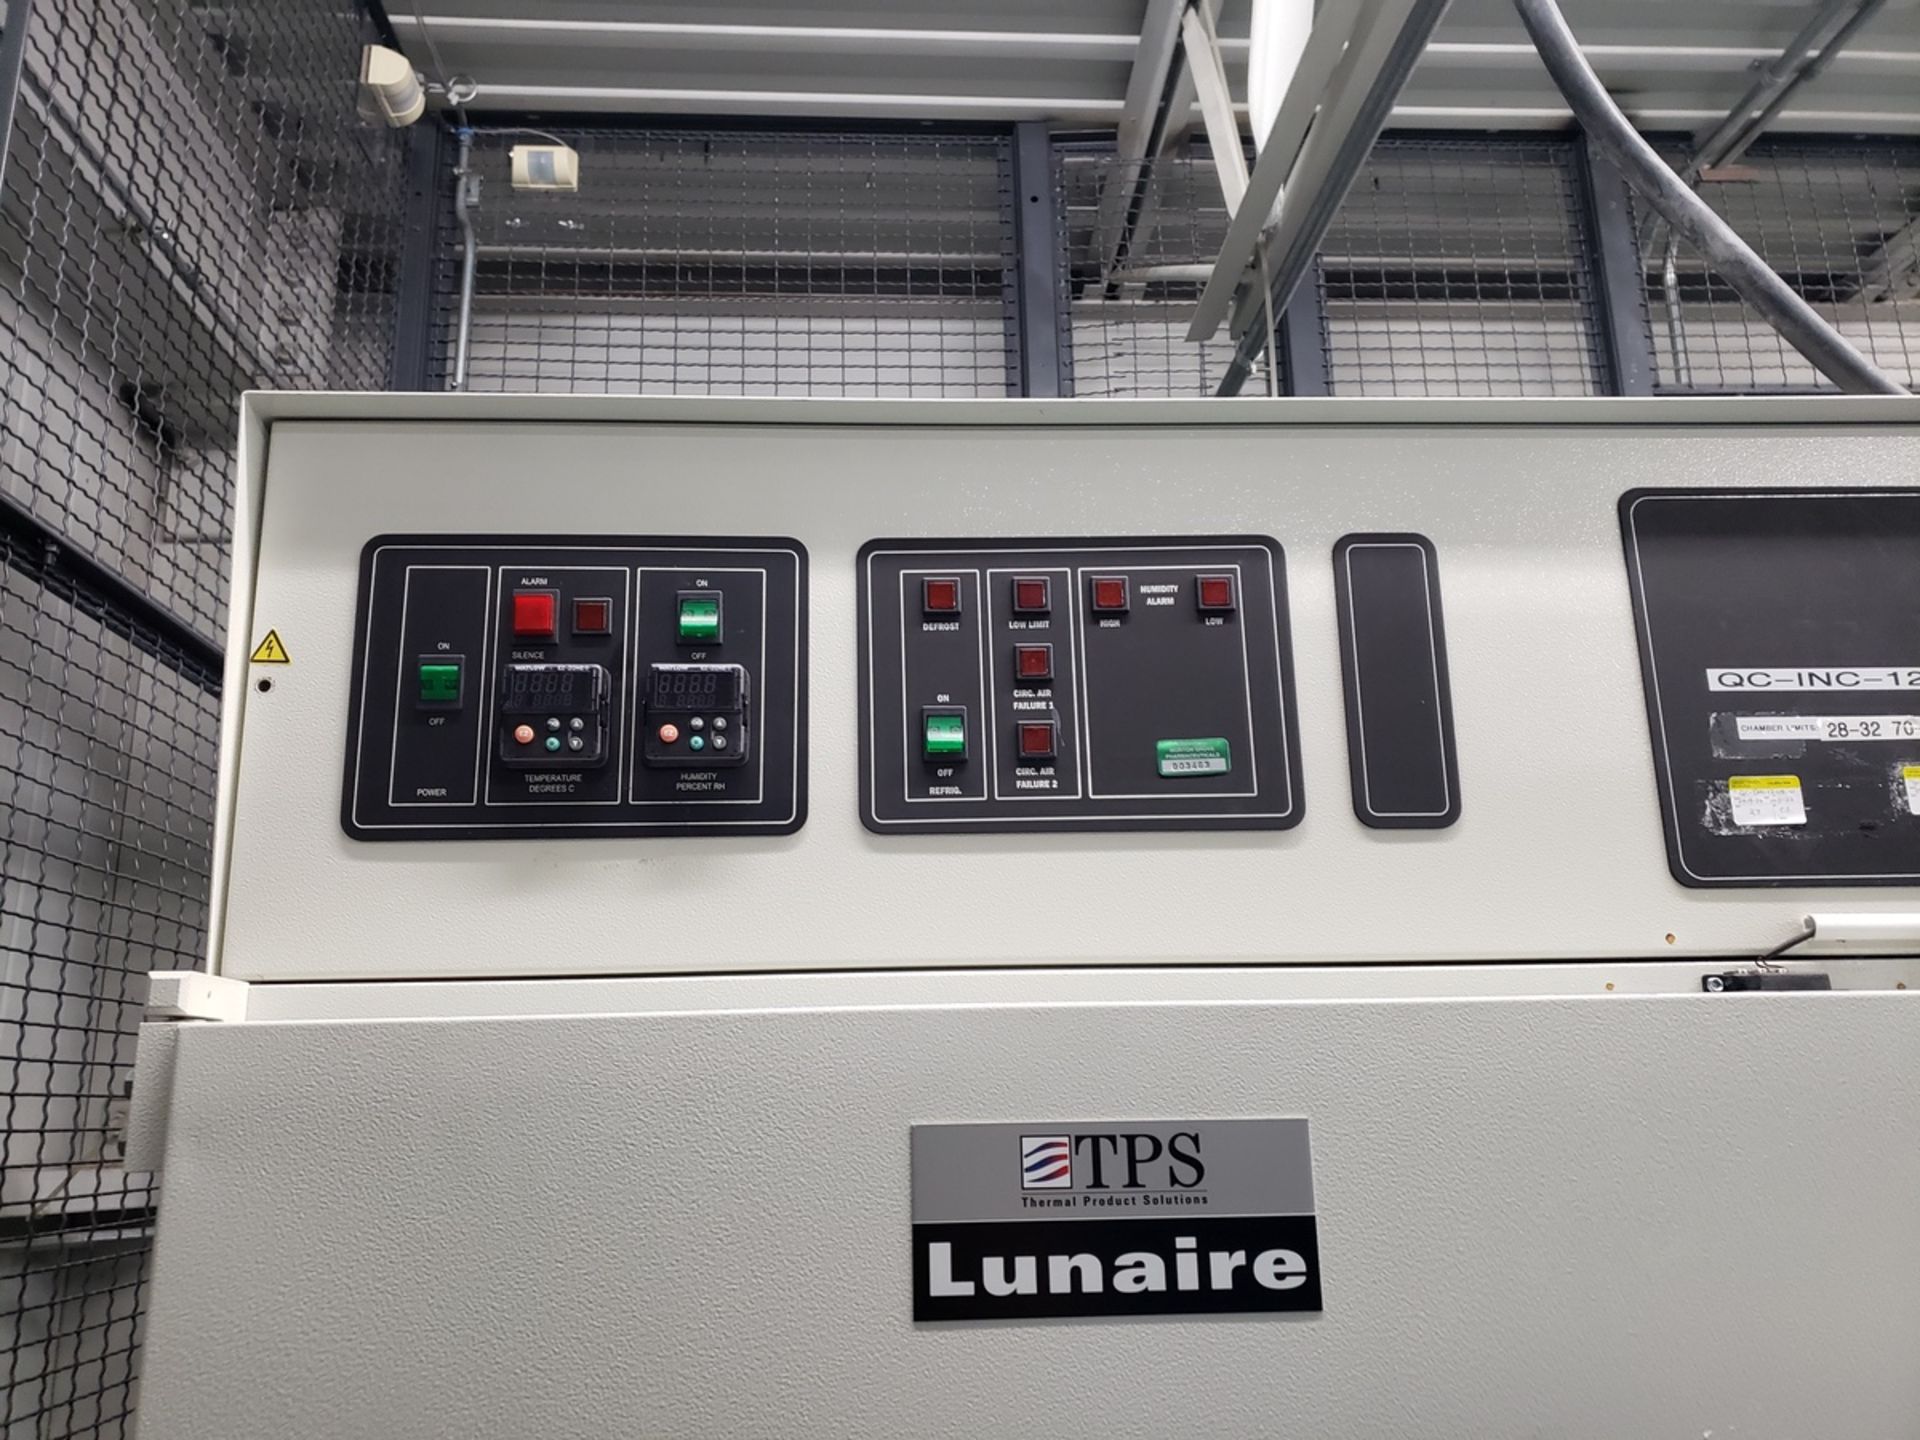 TPS Lunaire Stability Chamber CEO958-4, S/N 33721-01 - Image 4 of 4